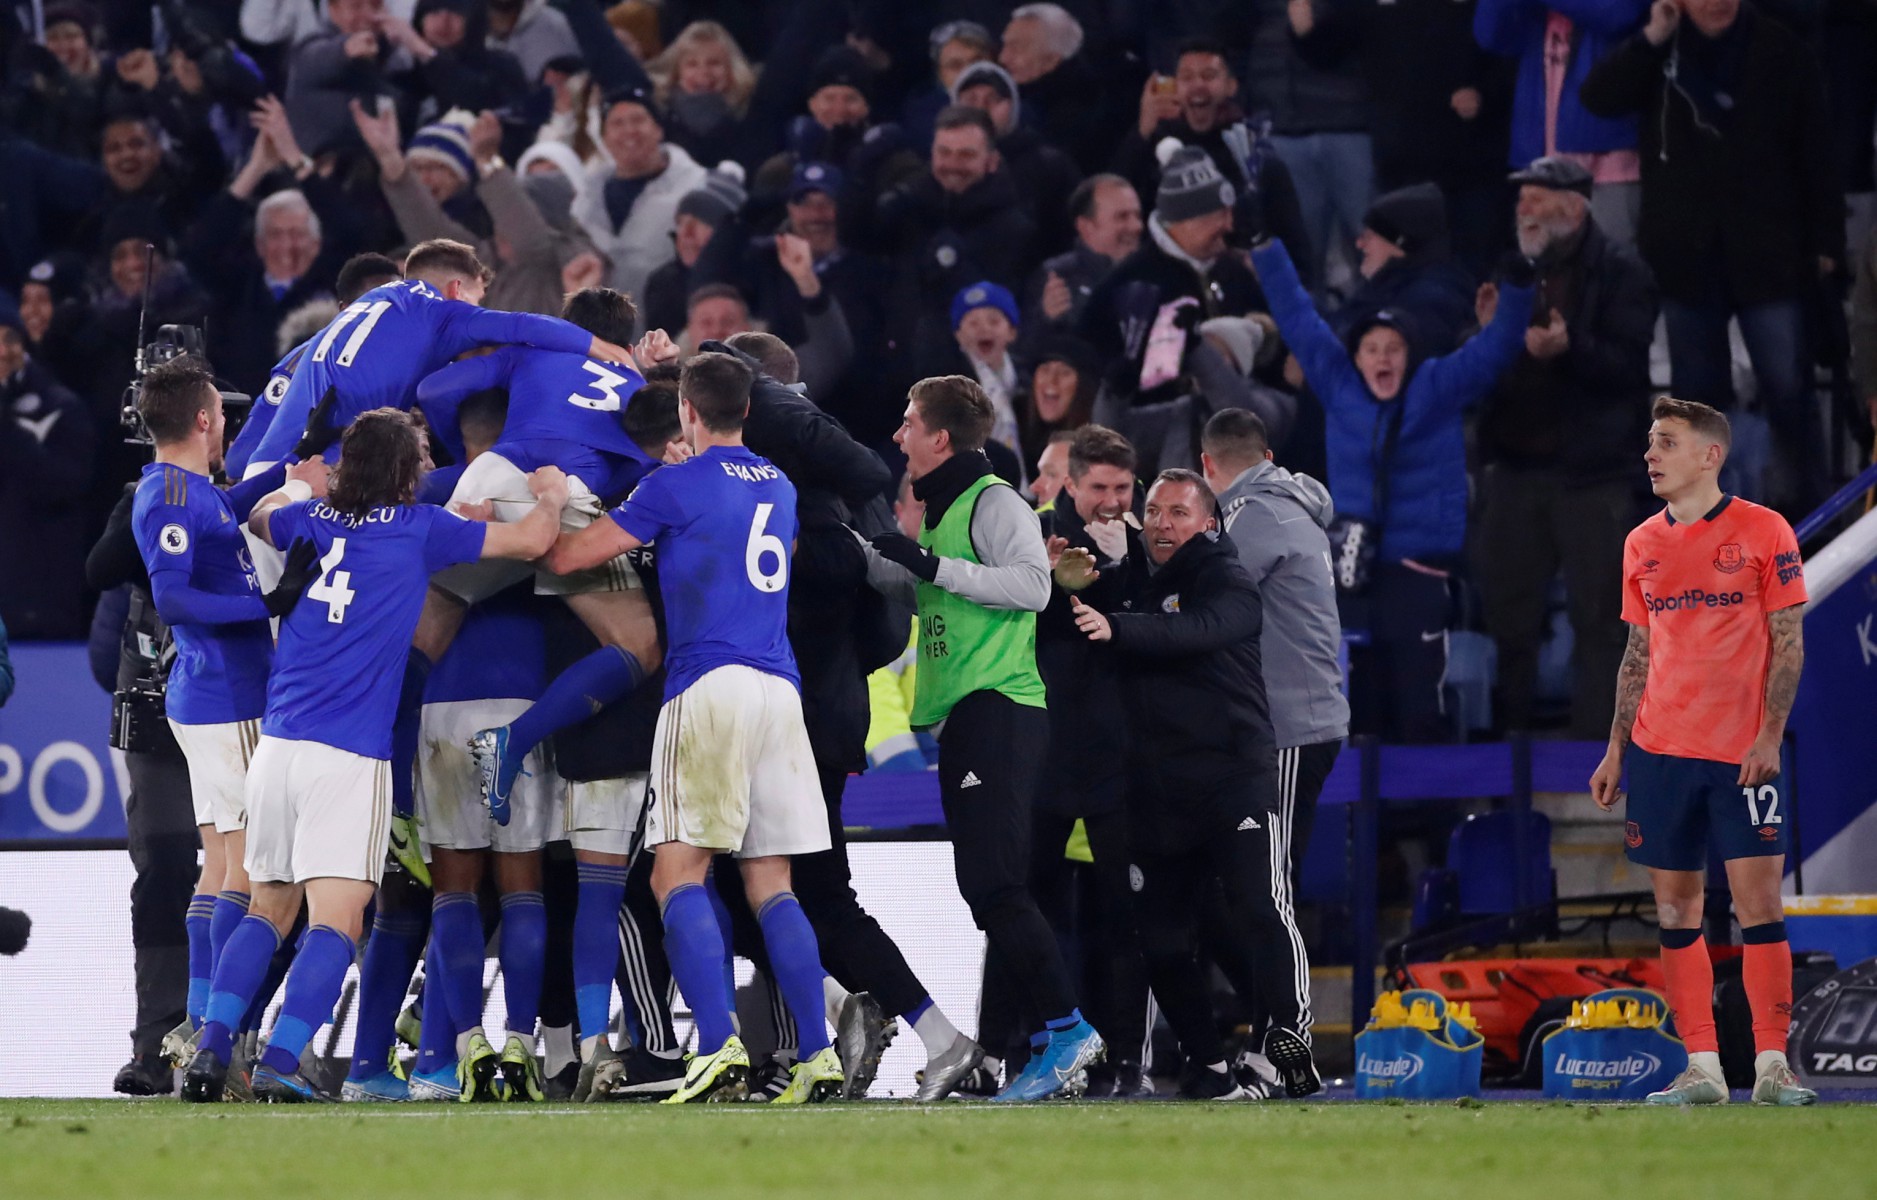 , Inside chaotic Leicester dressing room celebrations as players swarm on hero Iheanacho after dramatic Everton winner